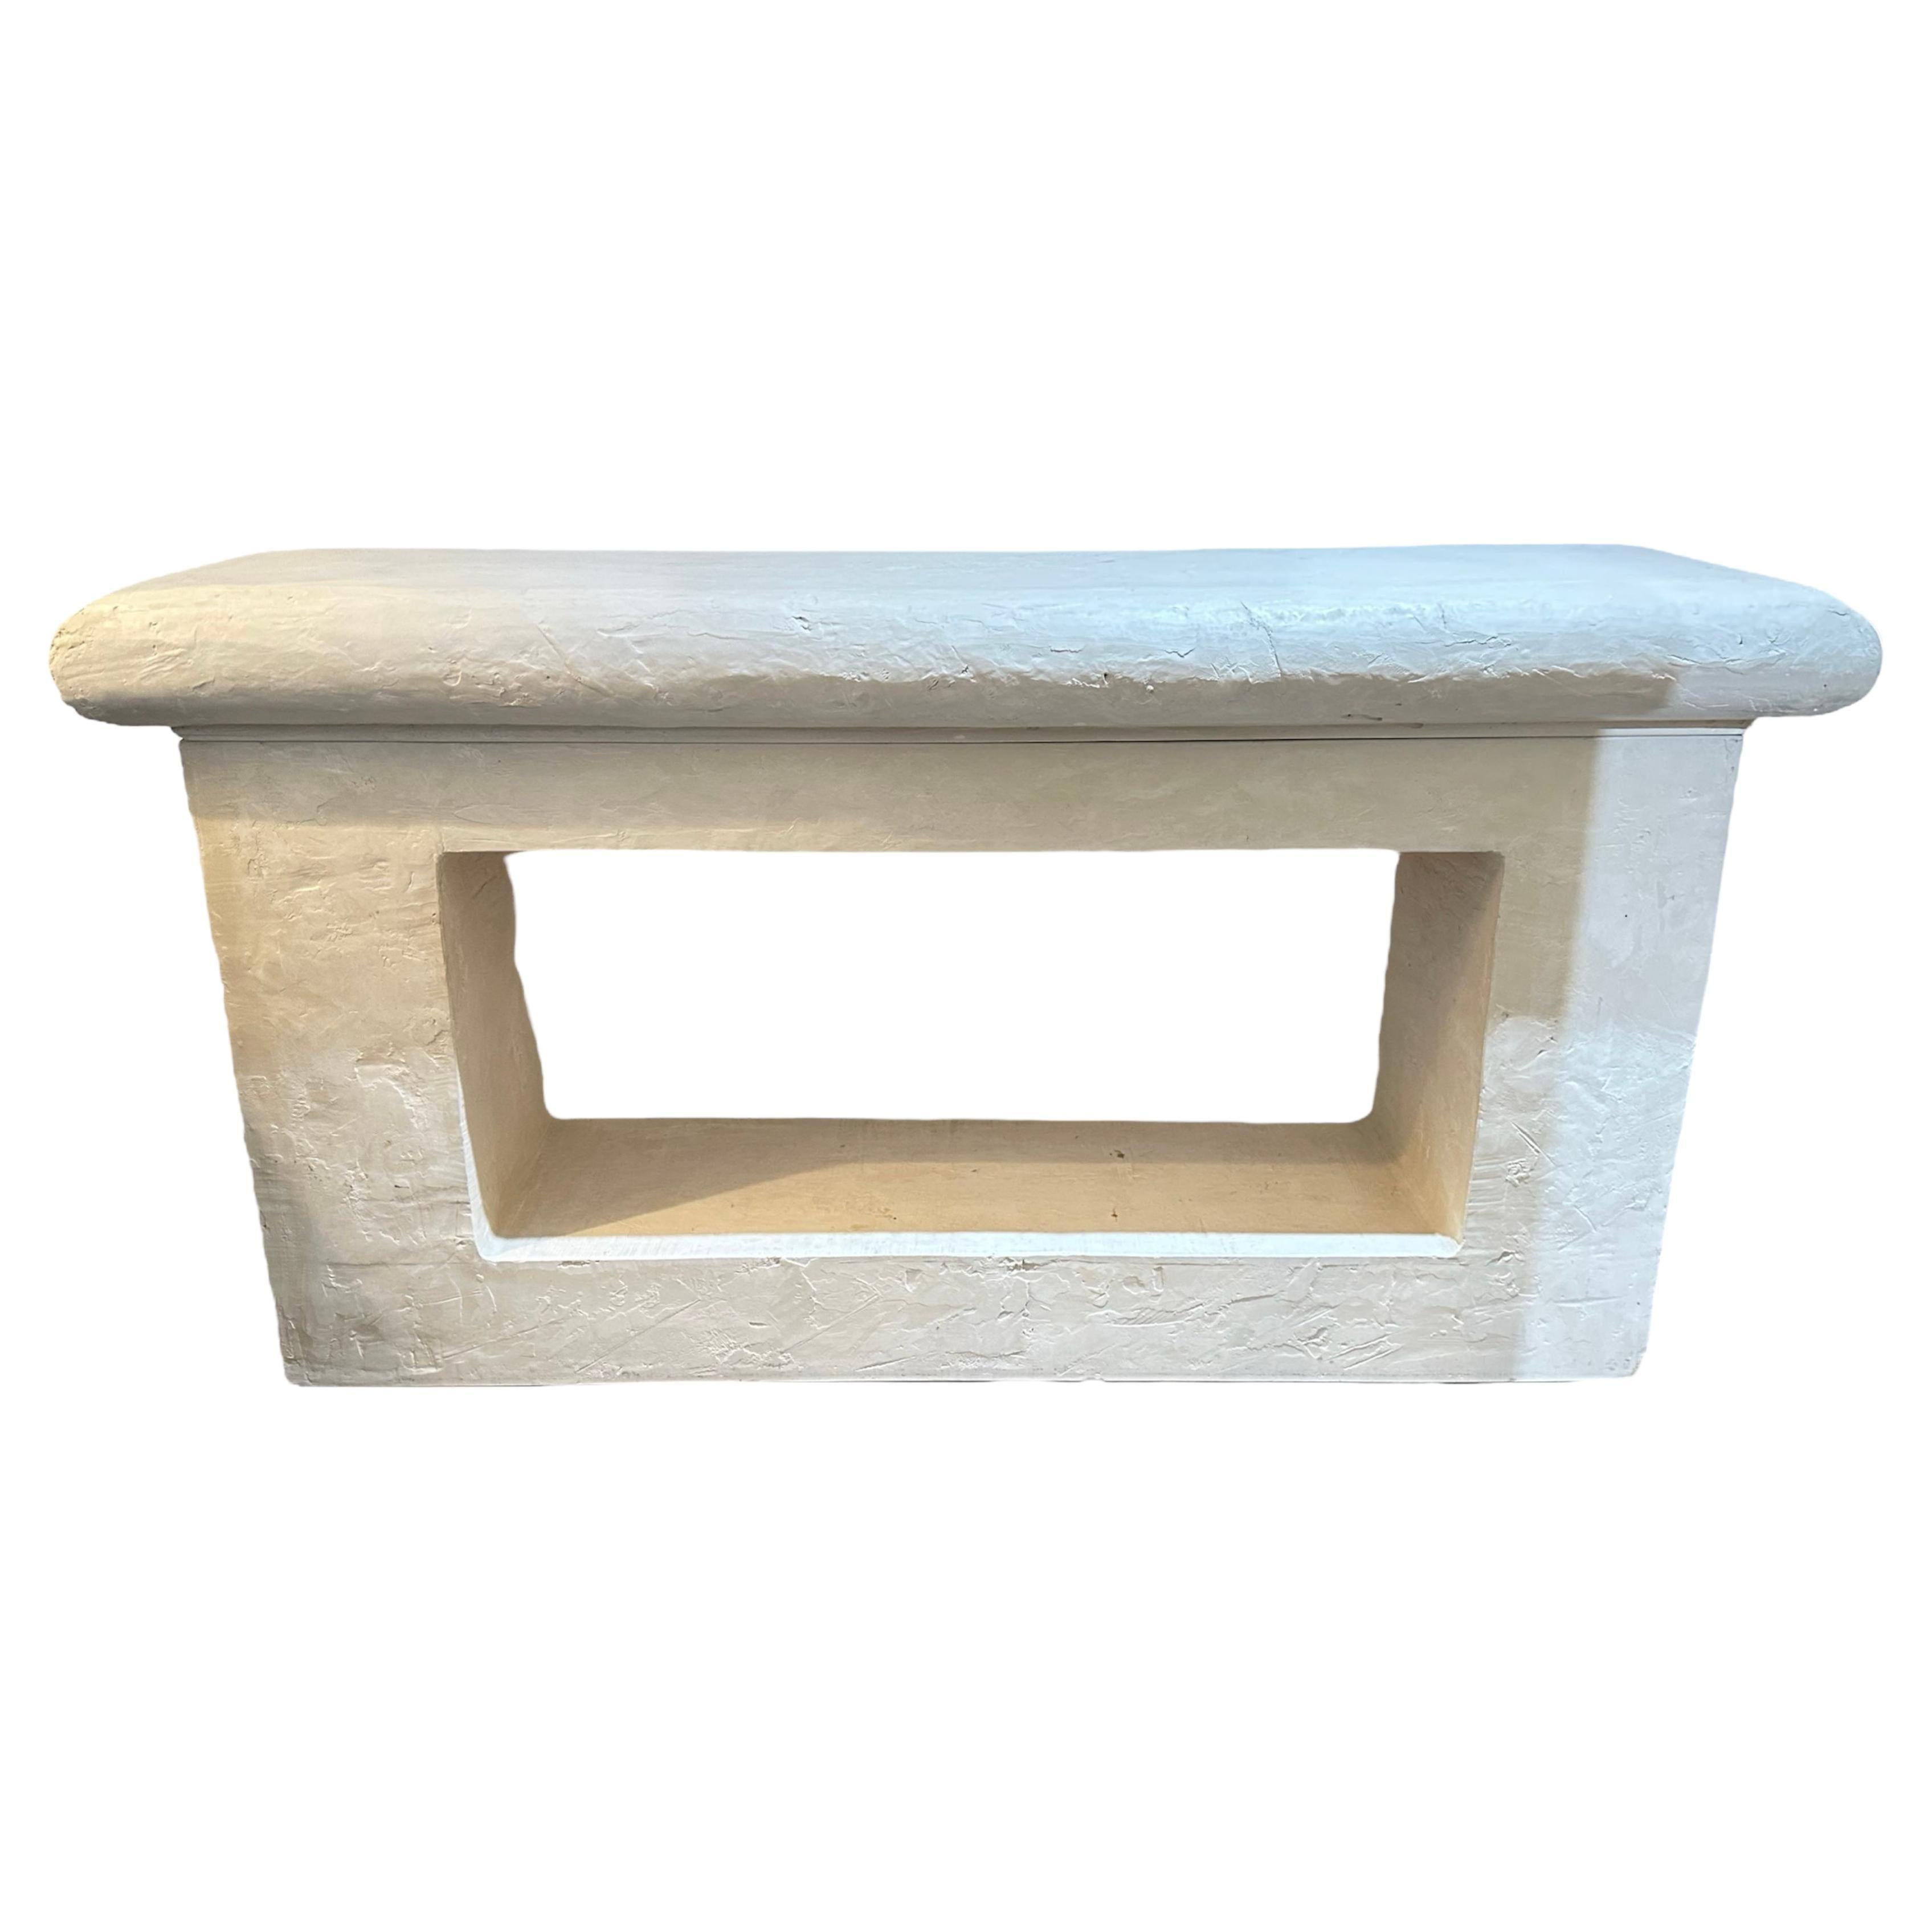 Post Modern console, there’s a very interesting piece it looks like cement or a stone, but it’s a casted plaster of some sorts very well-made and what makes it fabulous is that it’s two pieces actually, I can move it across the room on sliders quite